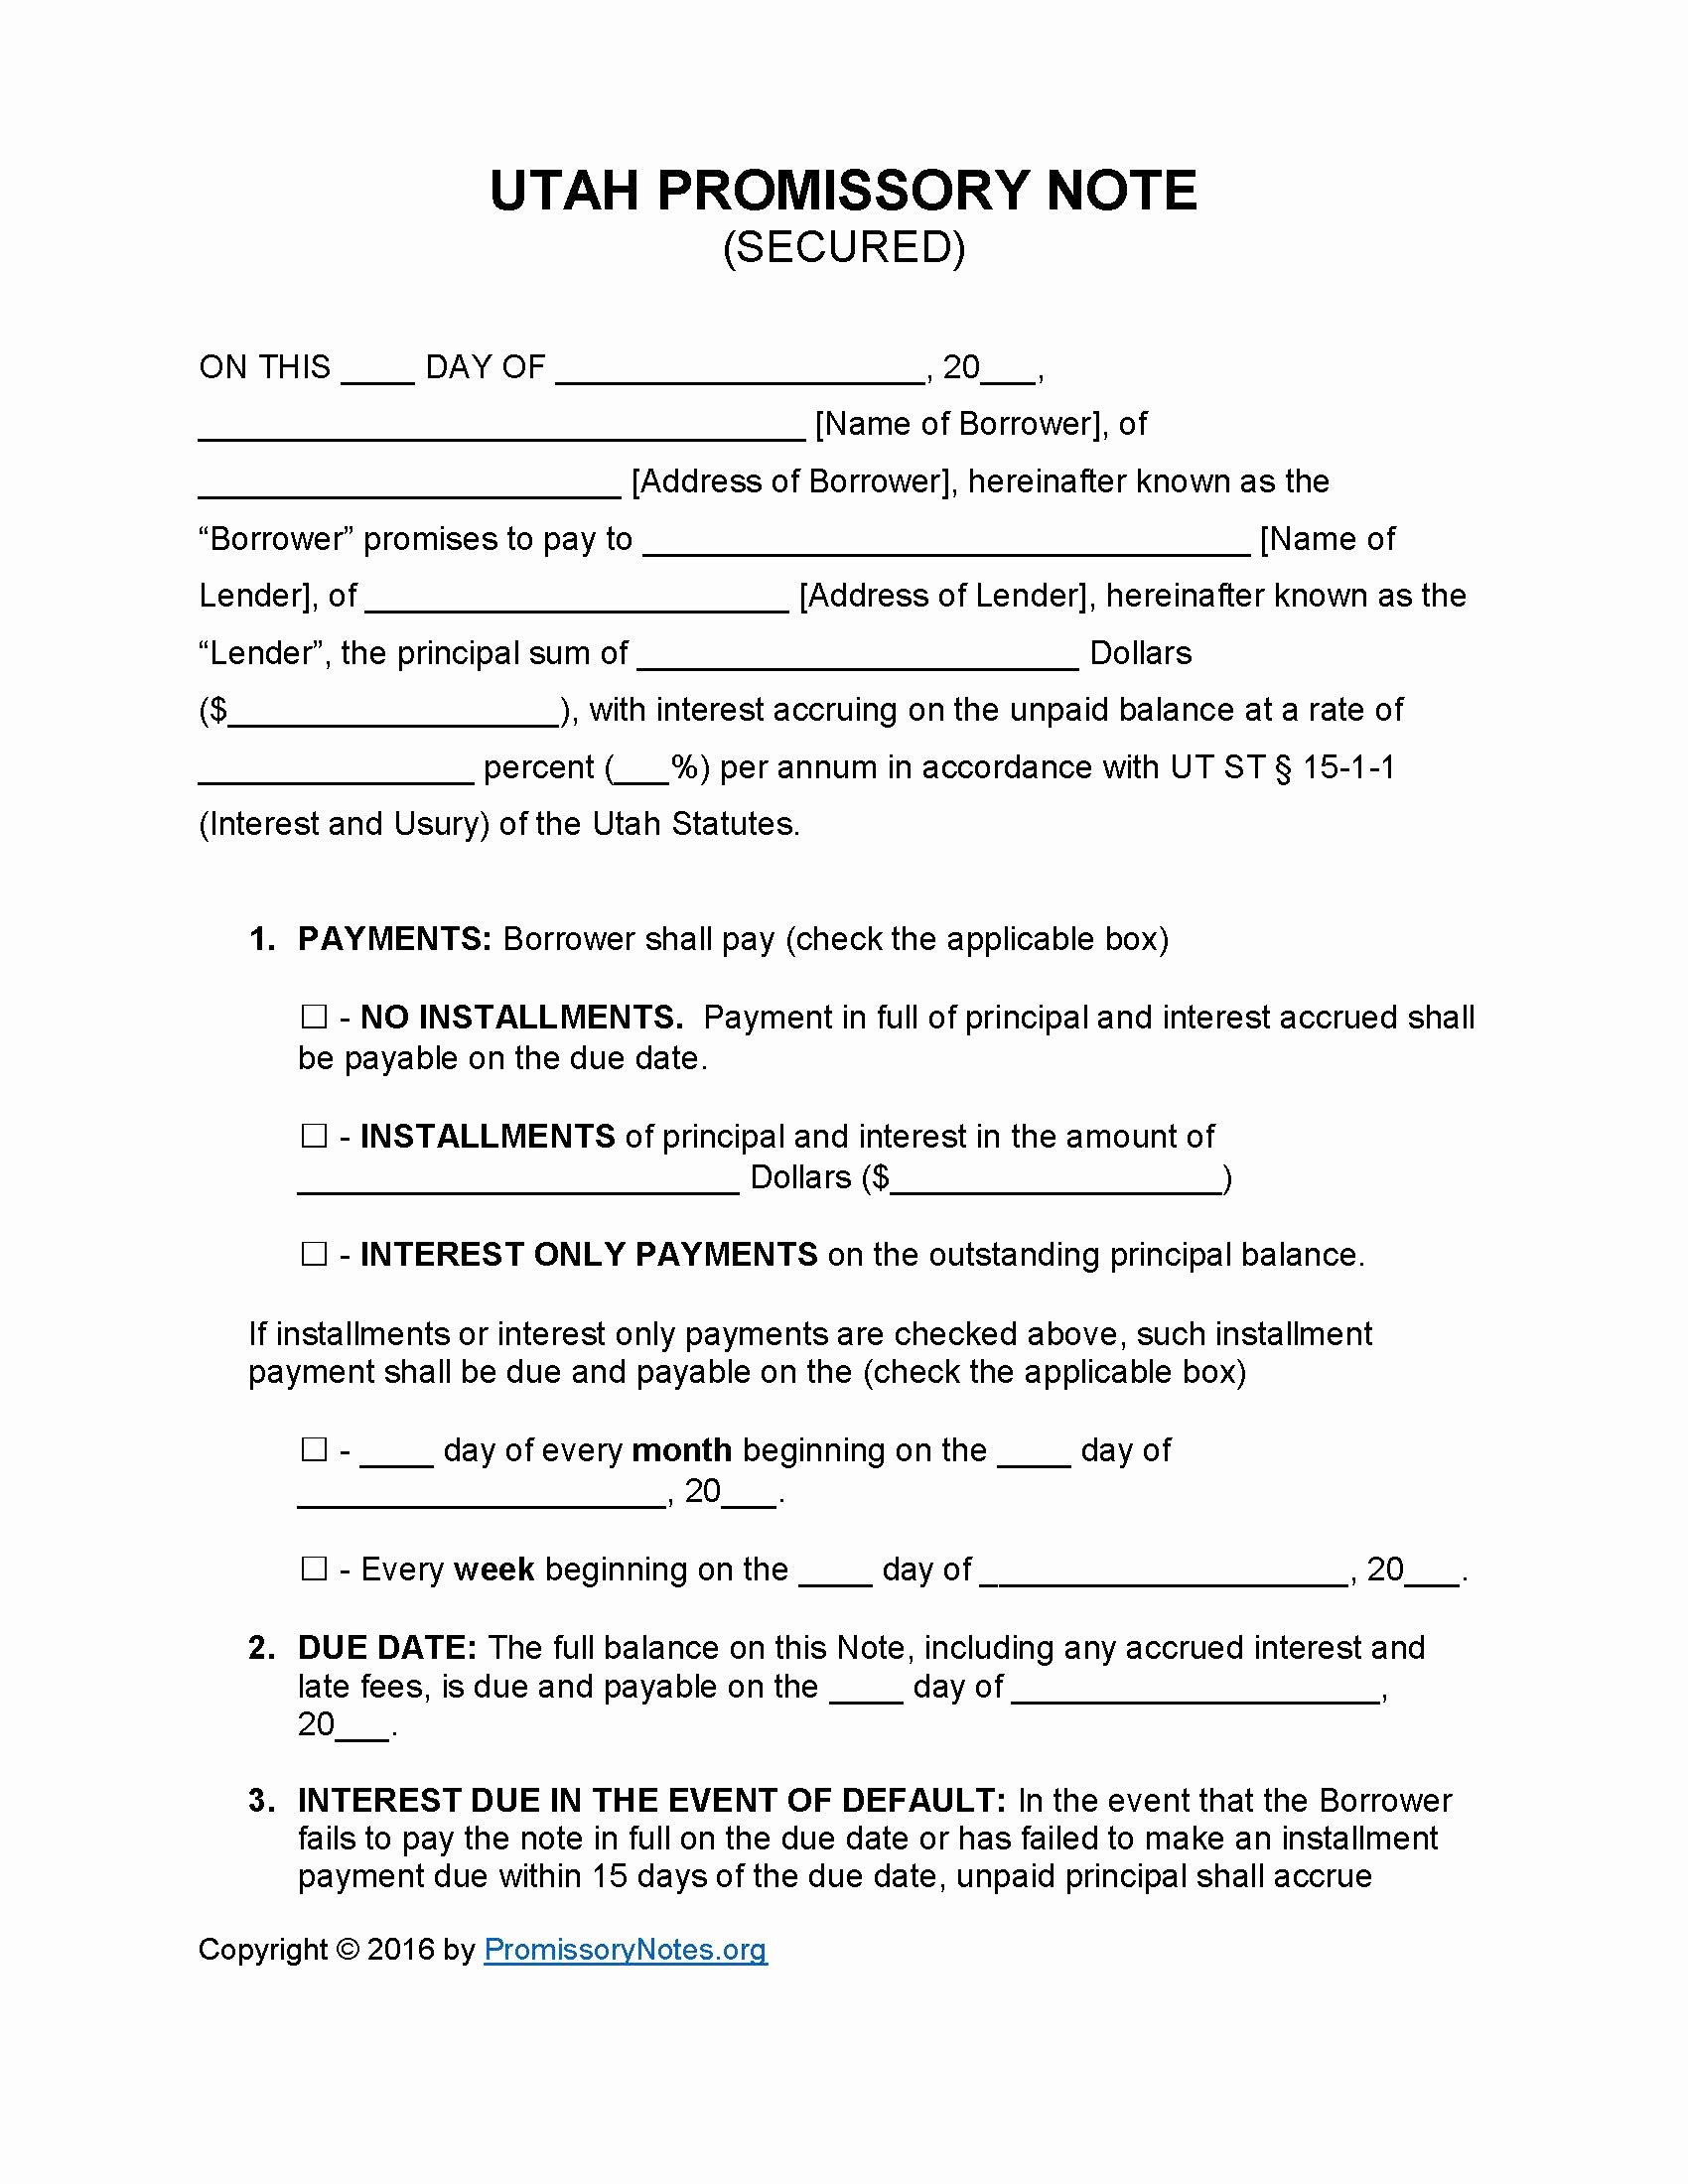 Secured Promissory Note Template Unique Utah Secured Promissory Note Template Promissory Notes Promissory Notes